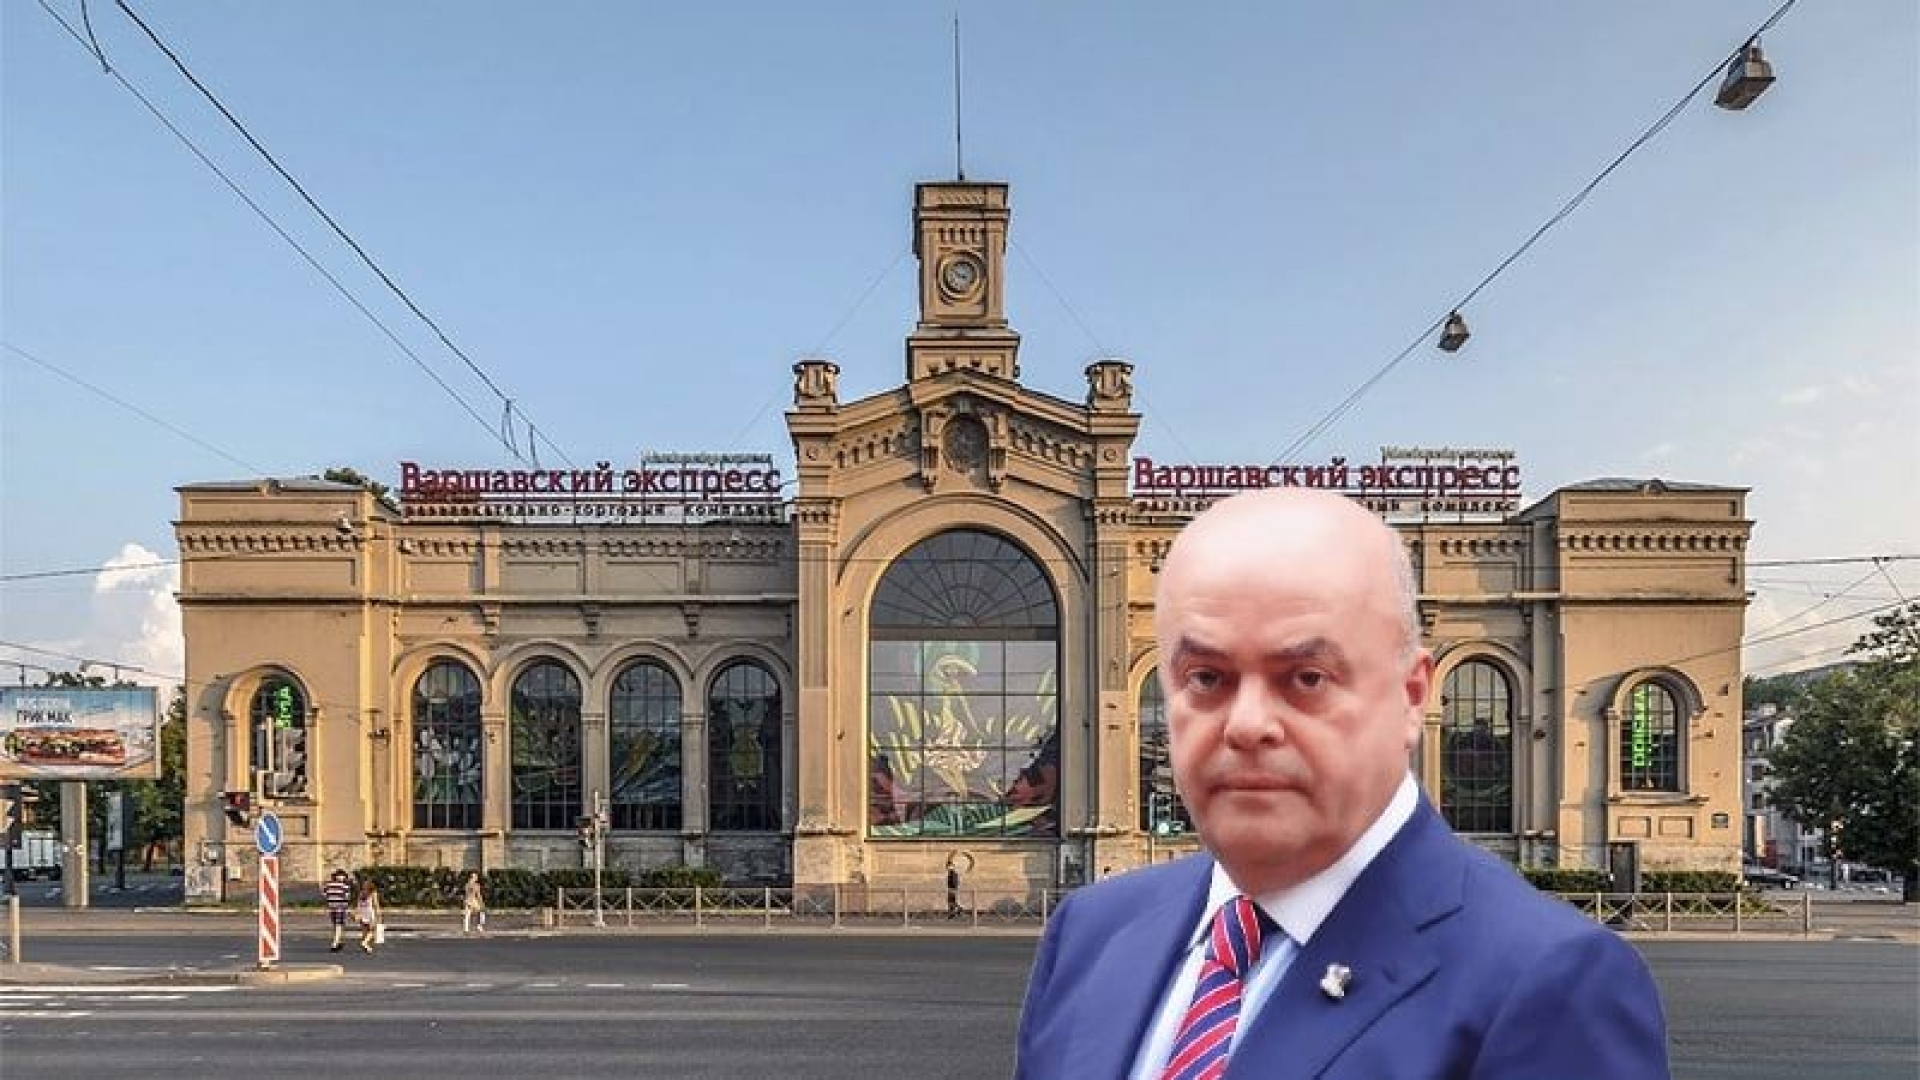 "Barmaley" will eat on Warsaw: will Golubev "transform" the historical building?